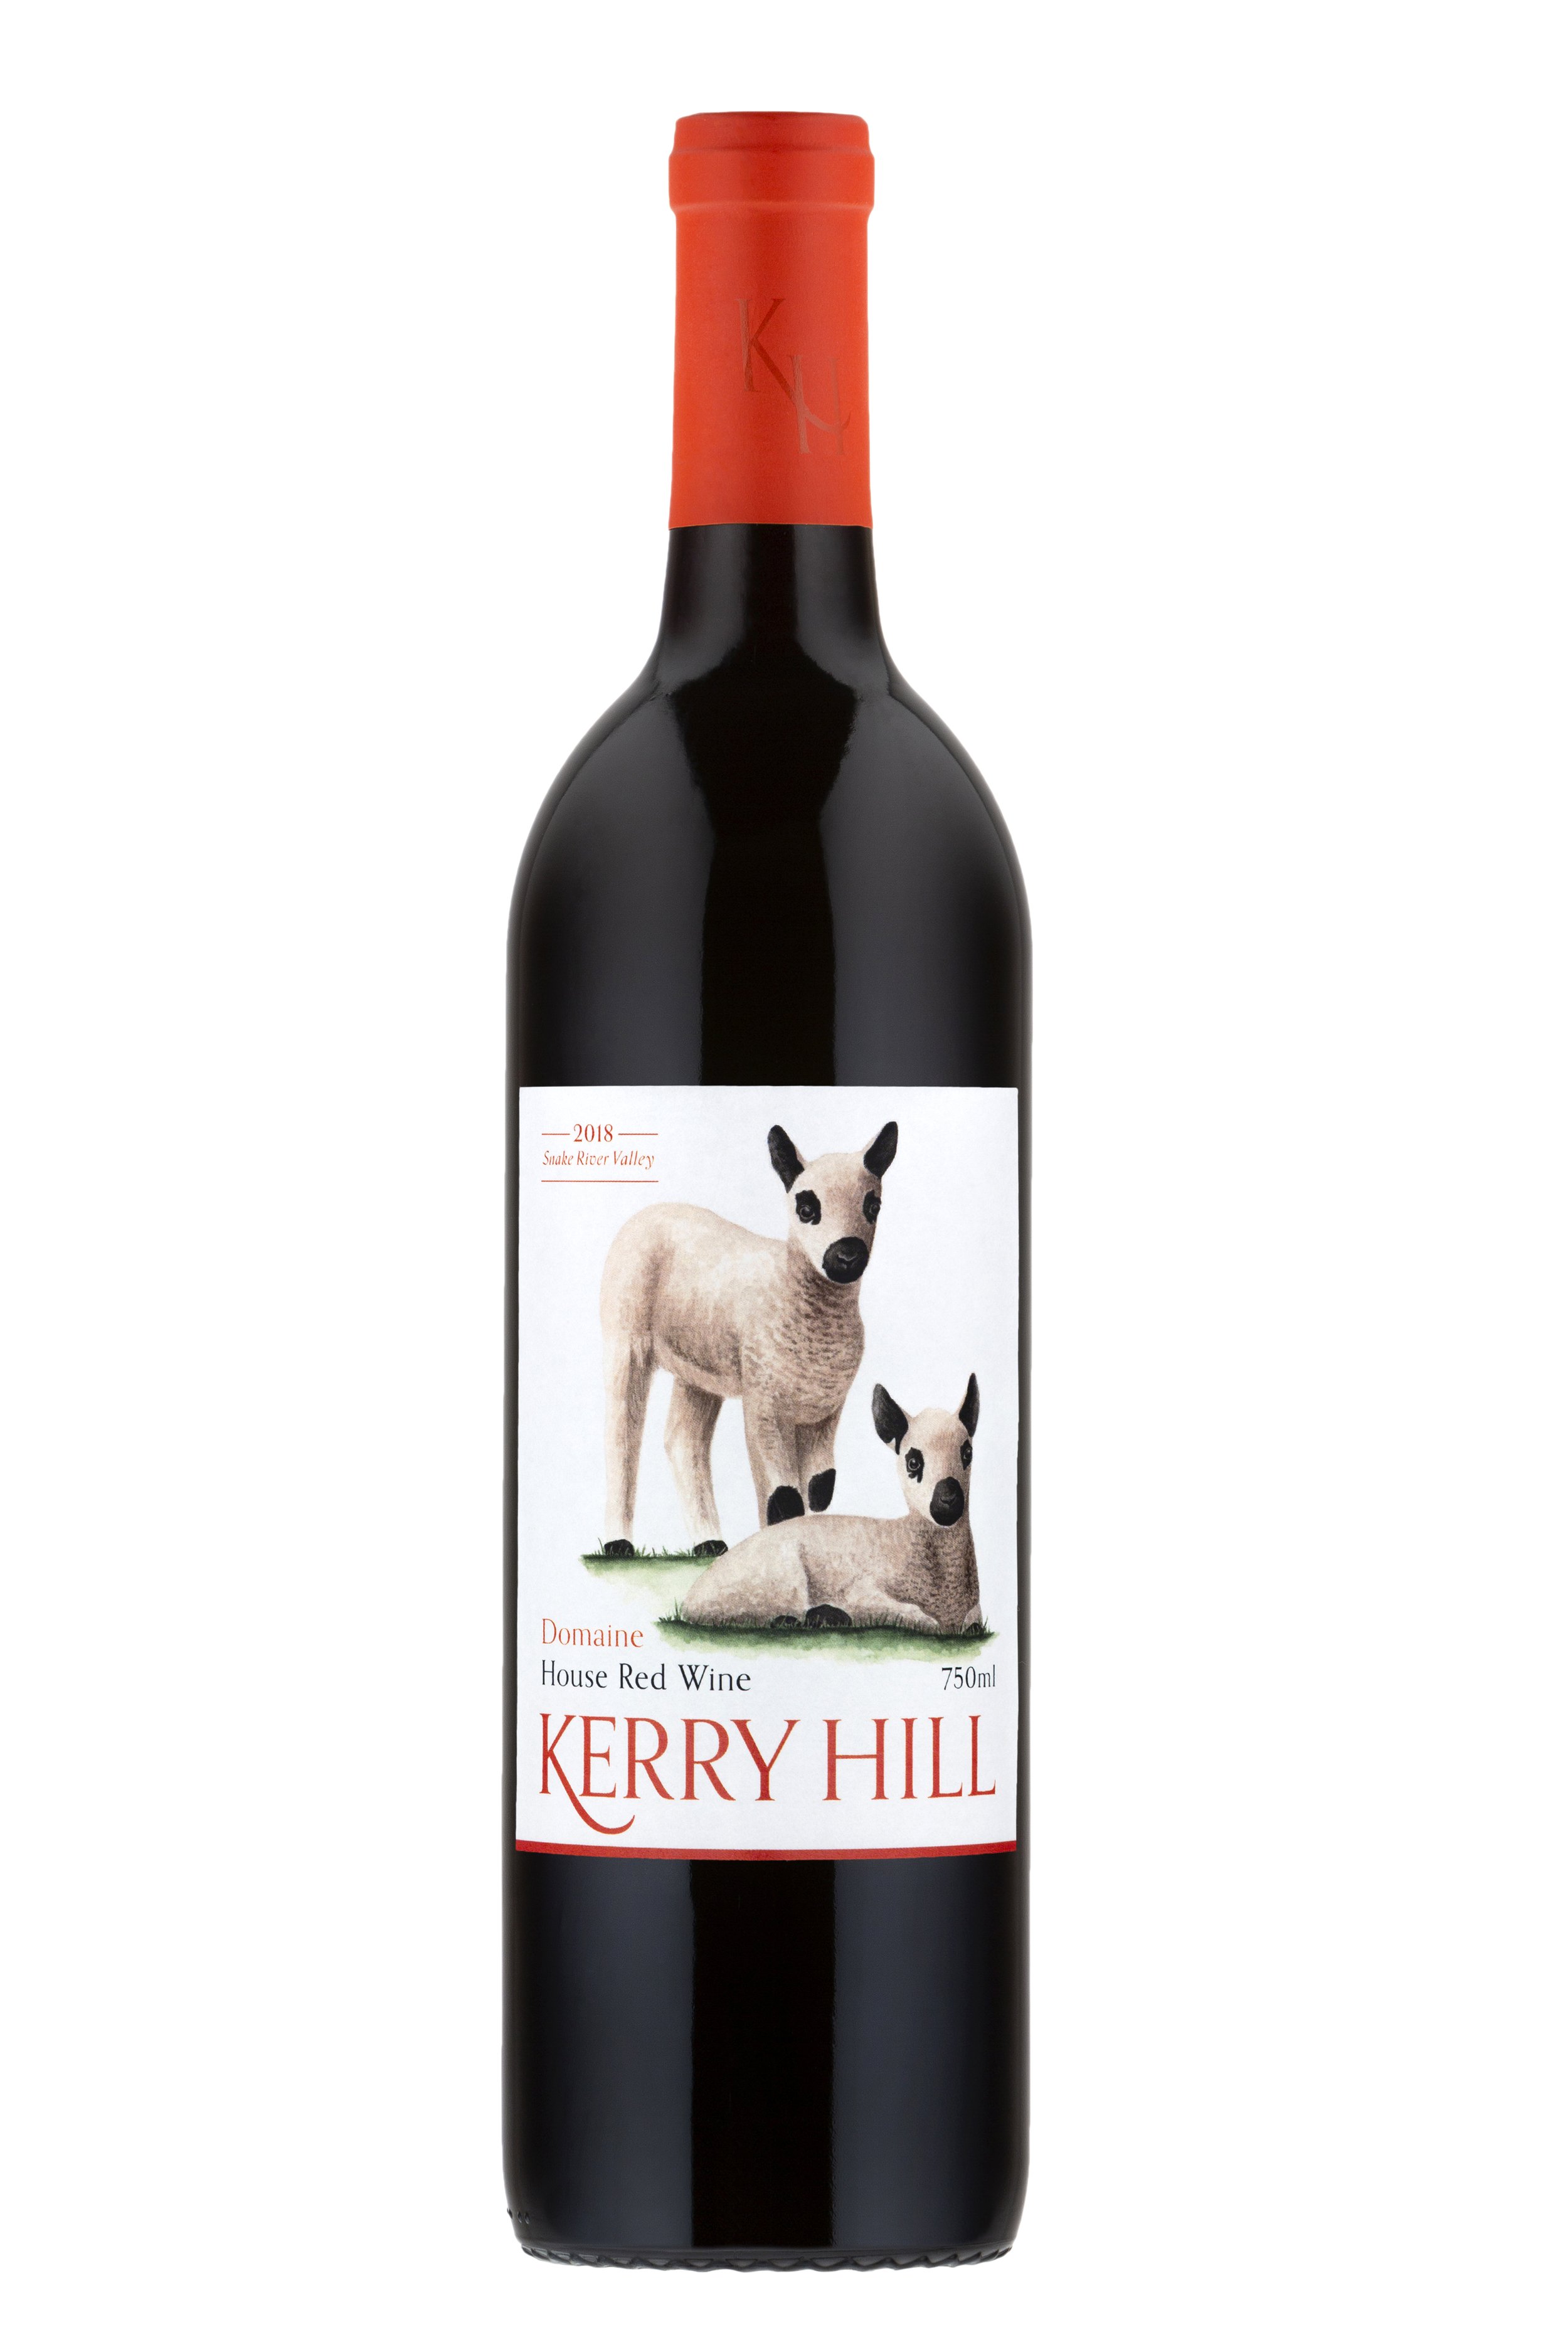 Bottle of Kerry Hill House Red Wine